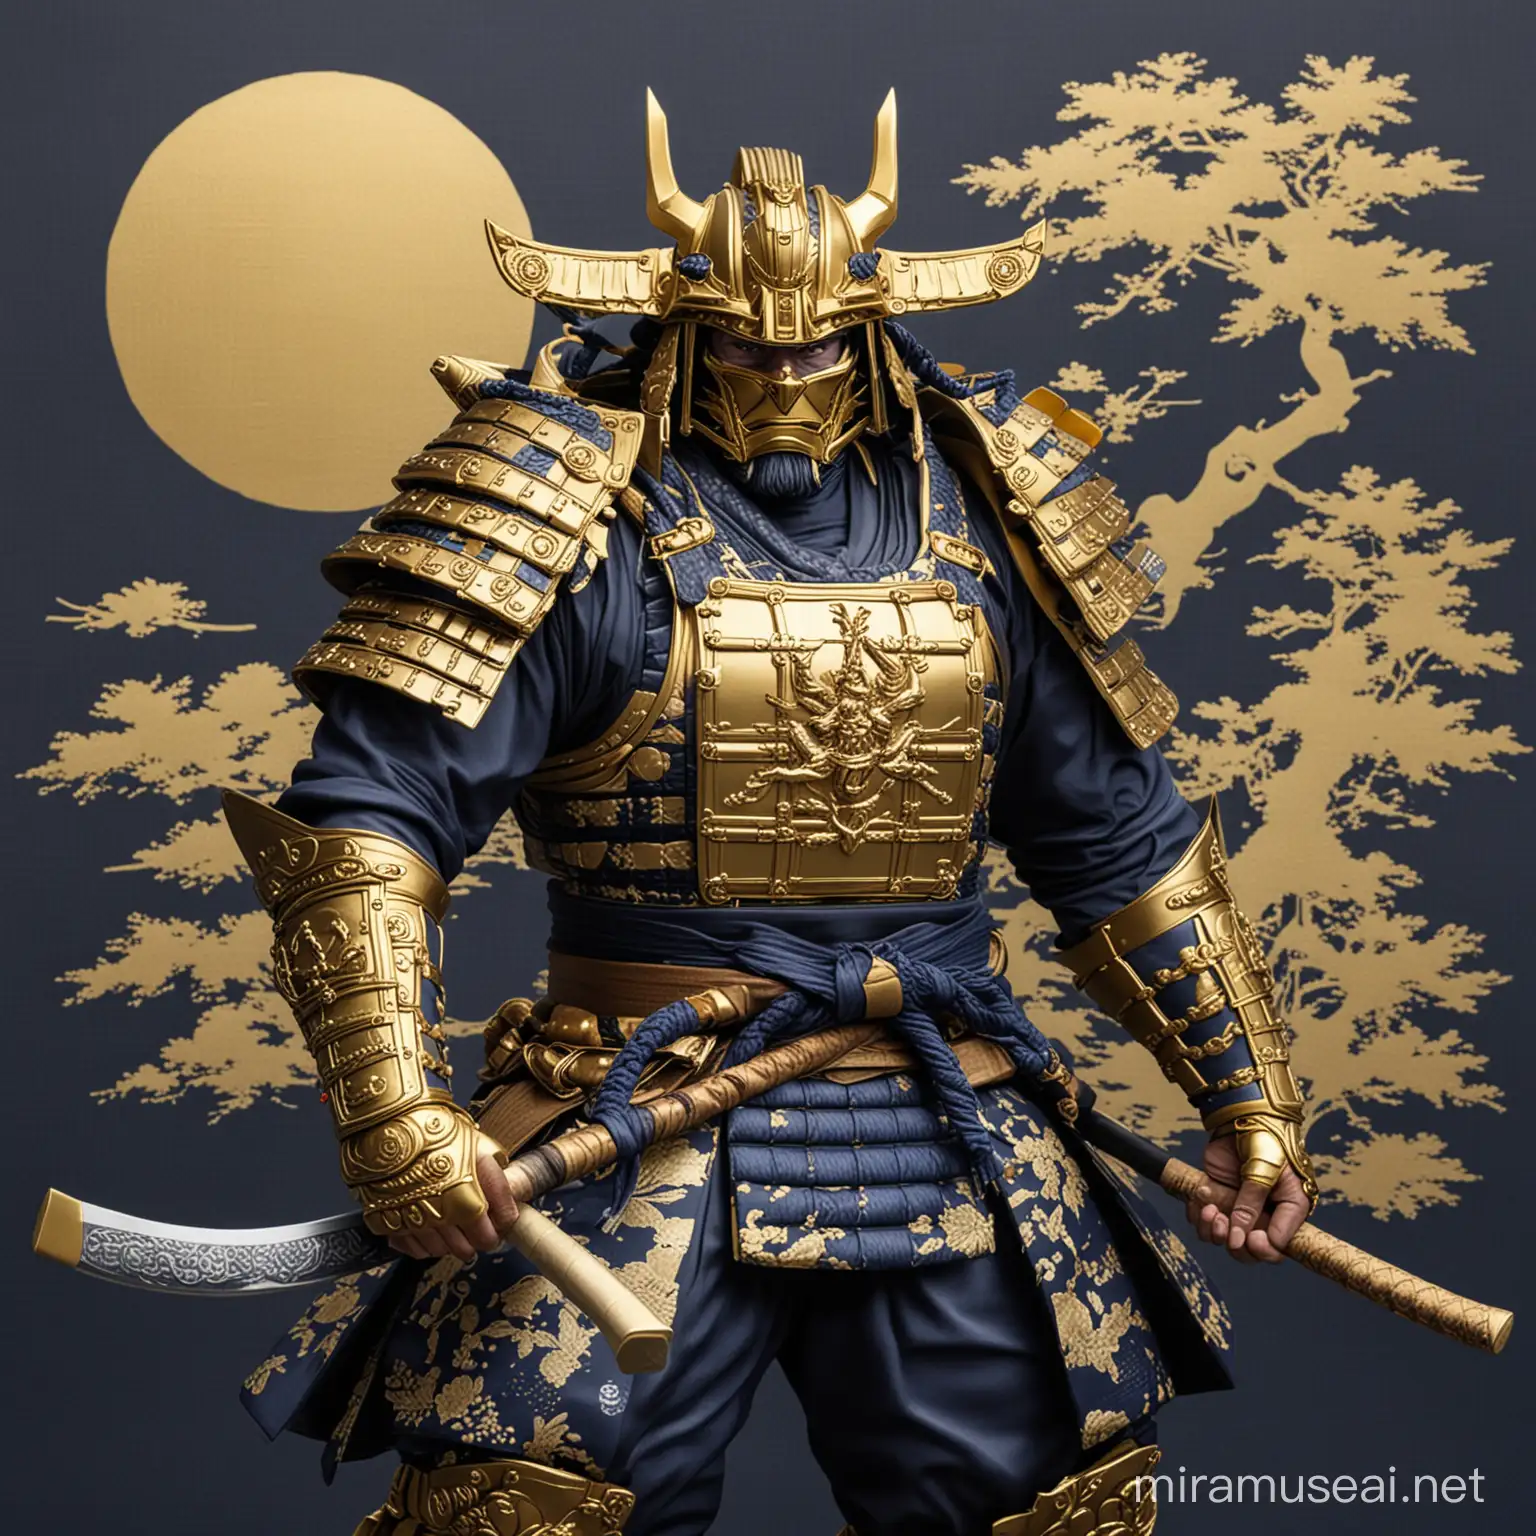 A shogun without a background with a combination of navy and gold